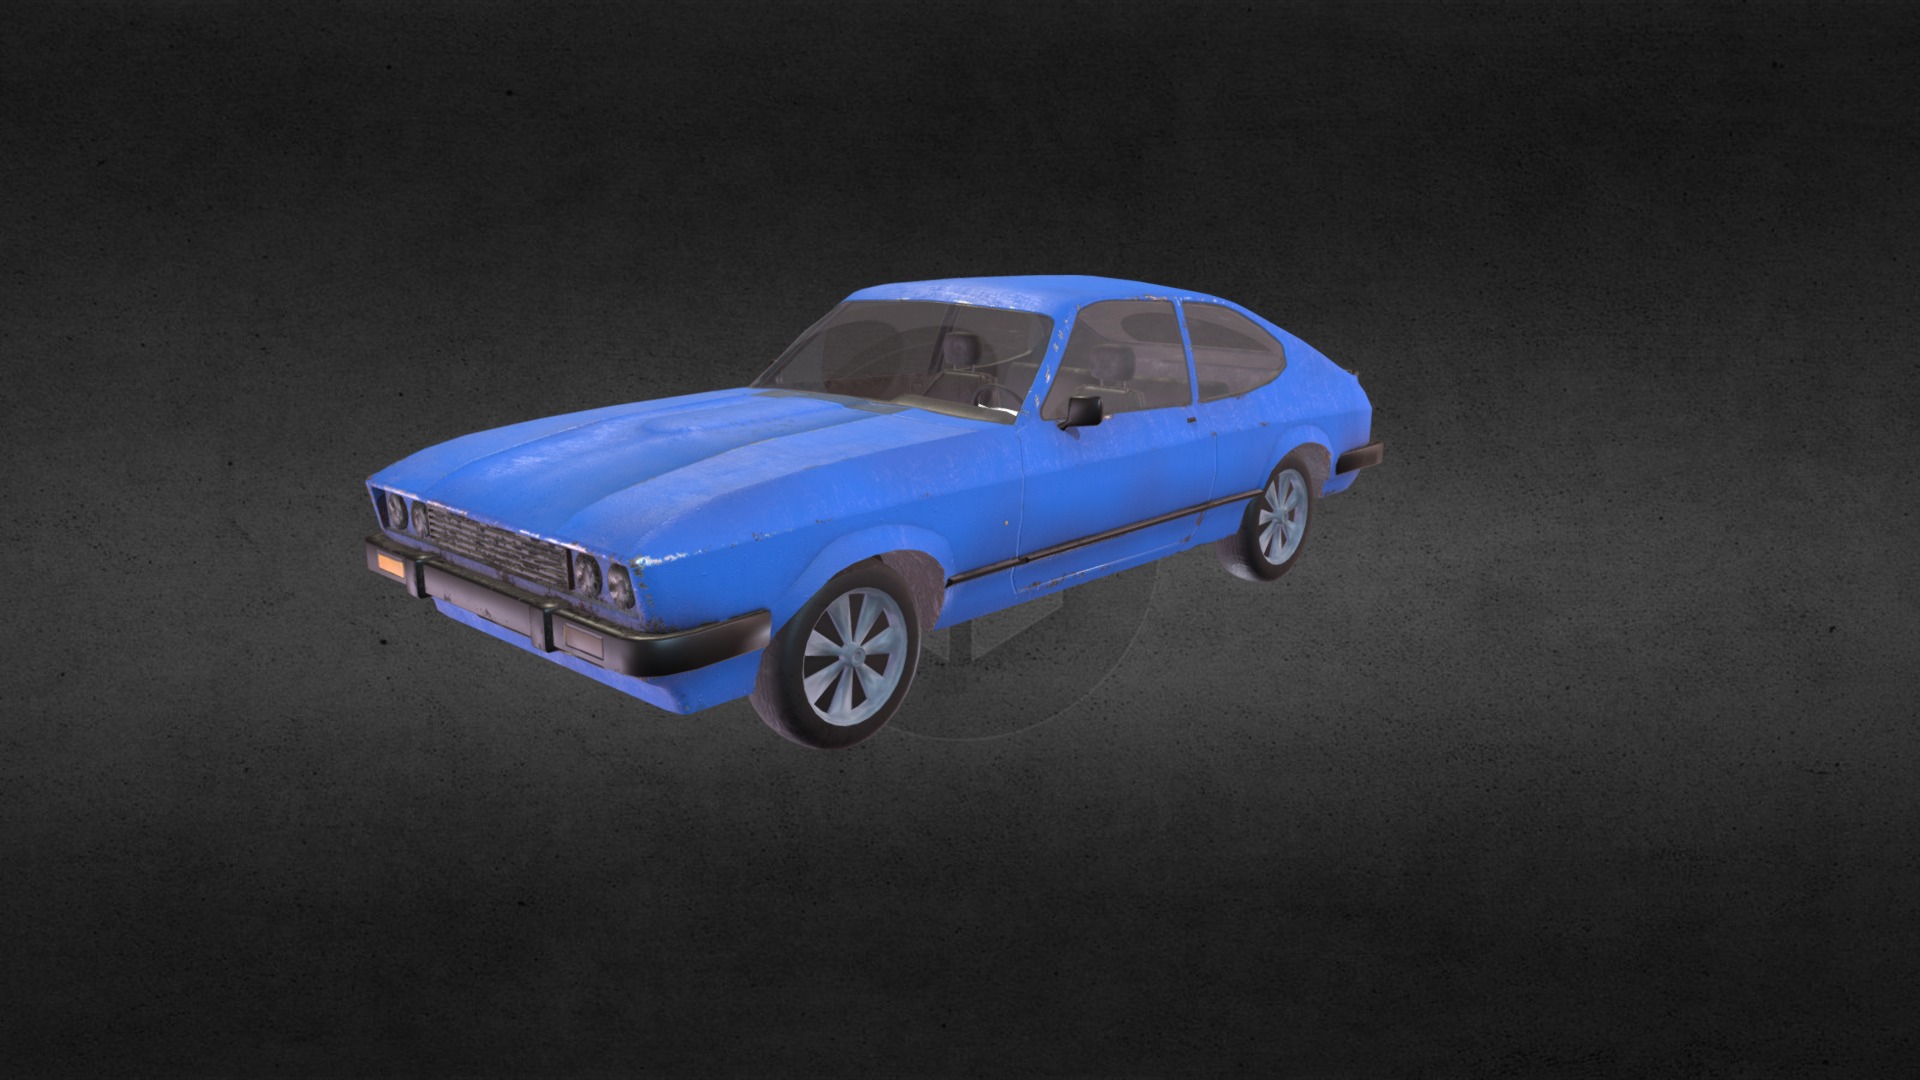 3D model Capri mk3 - This is a 3D model of the Capri mk3. The 3D model is about a blue car parked on a road.